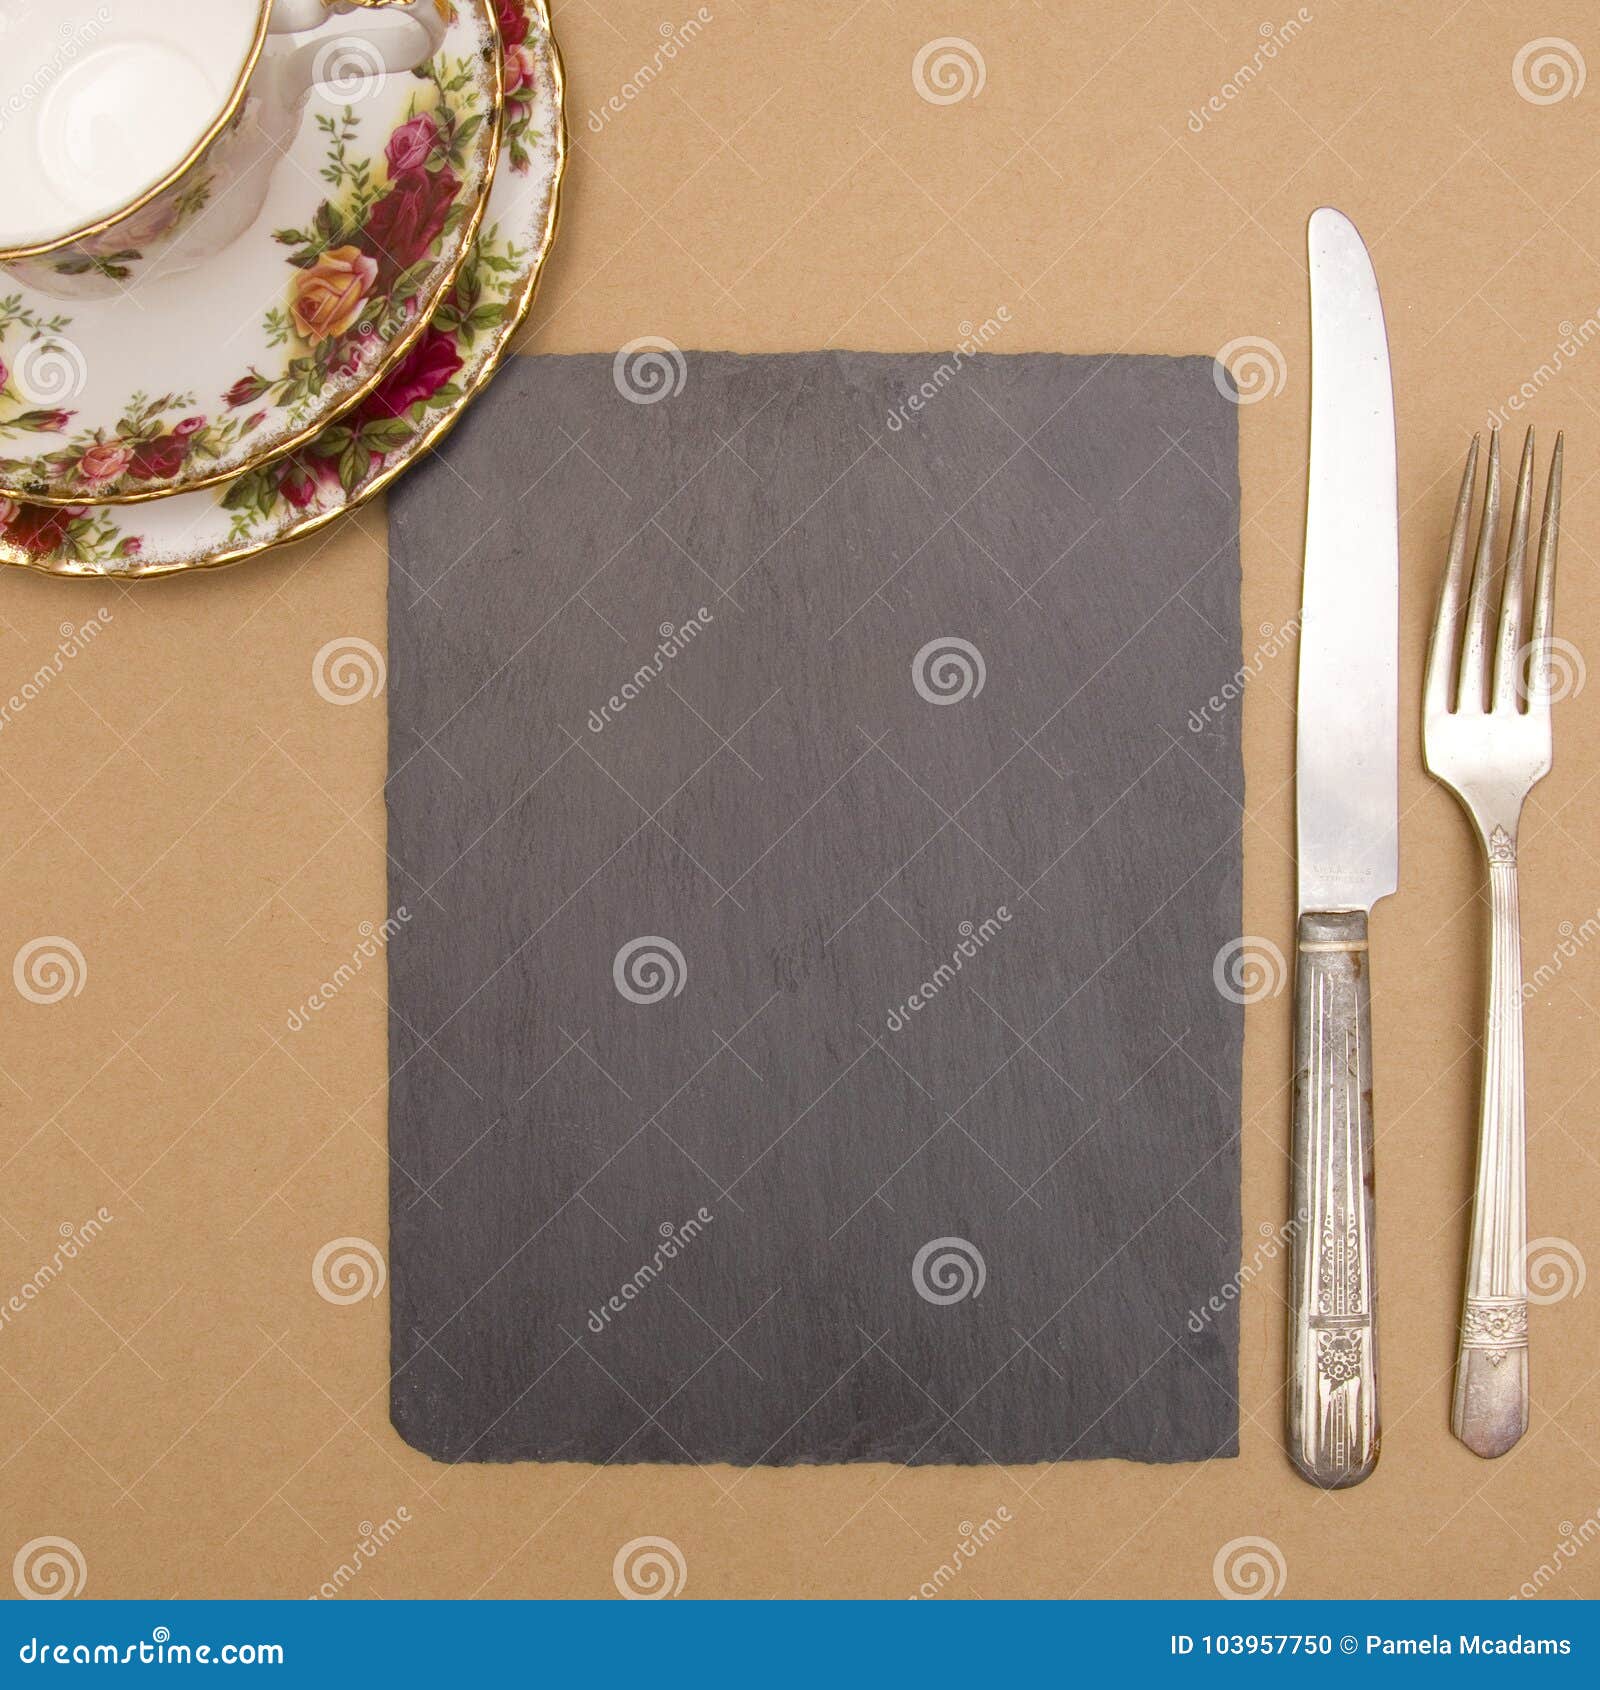 A Chalkboard Background - Perfect for a Dinner Menu Stock Photo - Image ...